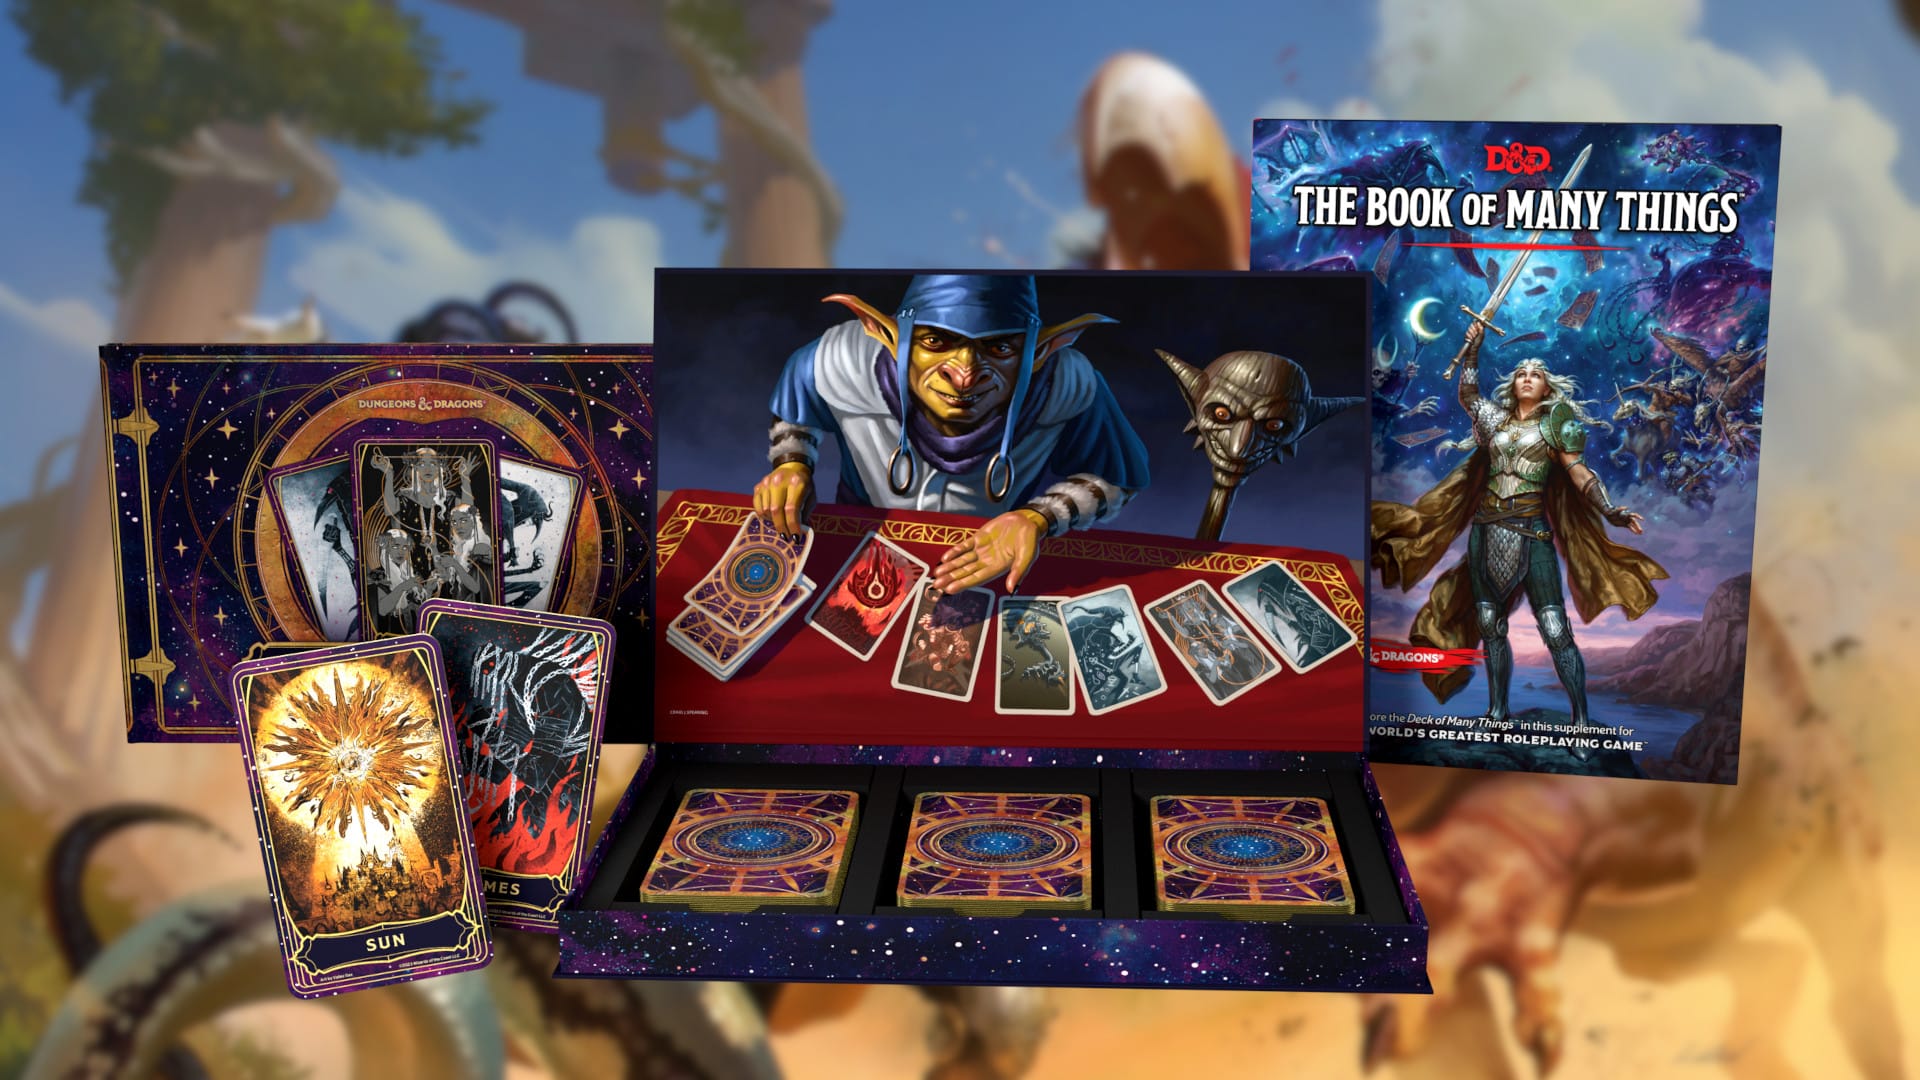 The Book of Many Is Filled With Even More Cards, Campaign